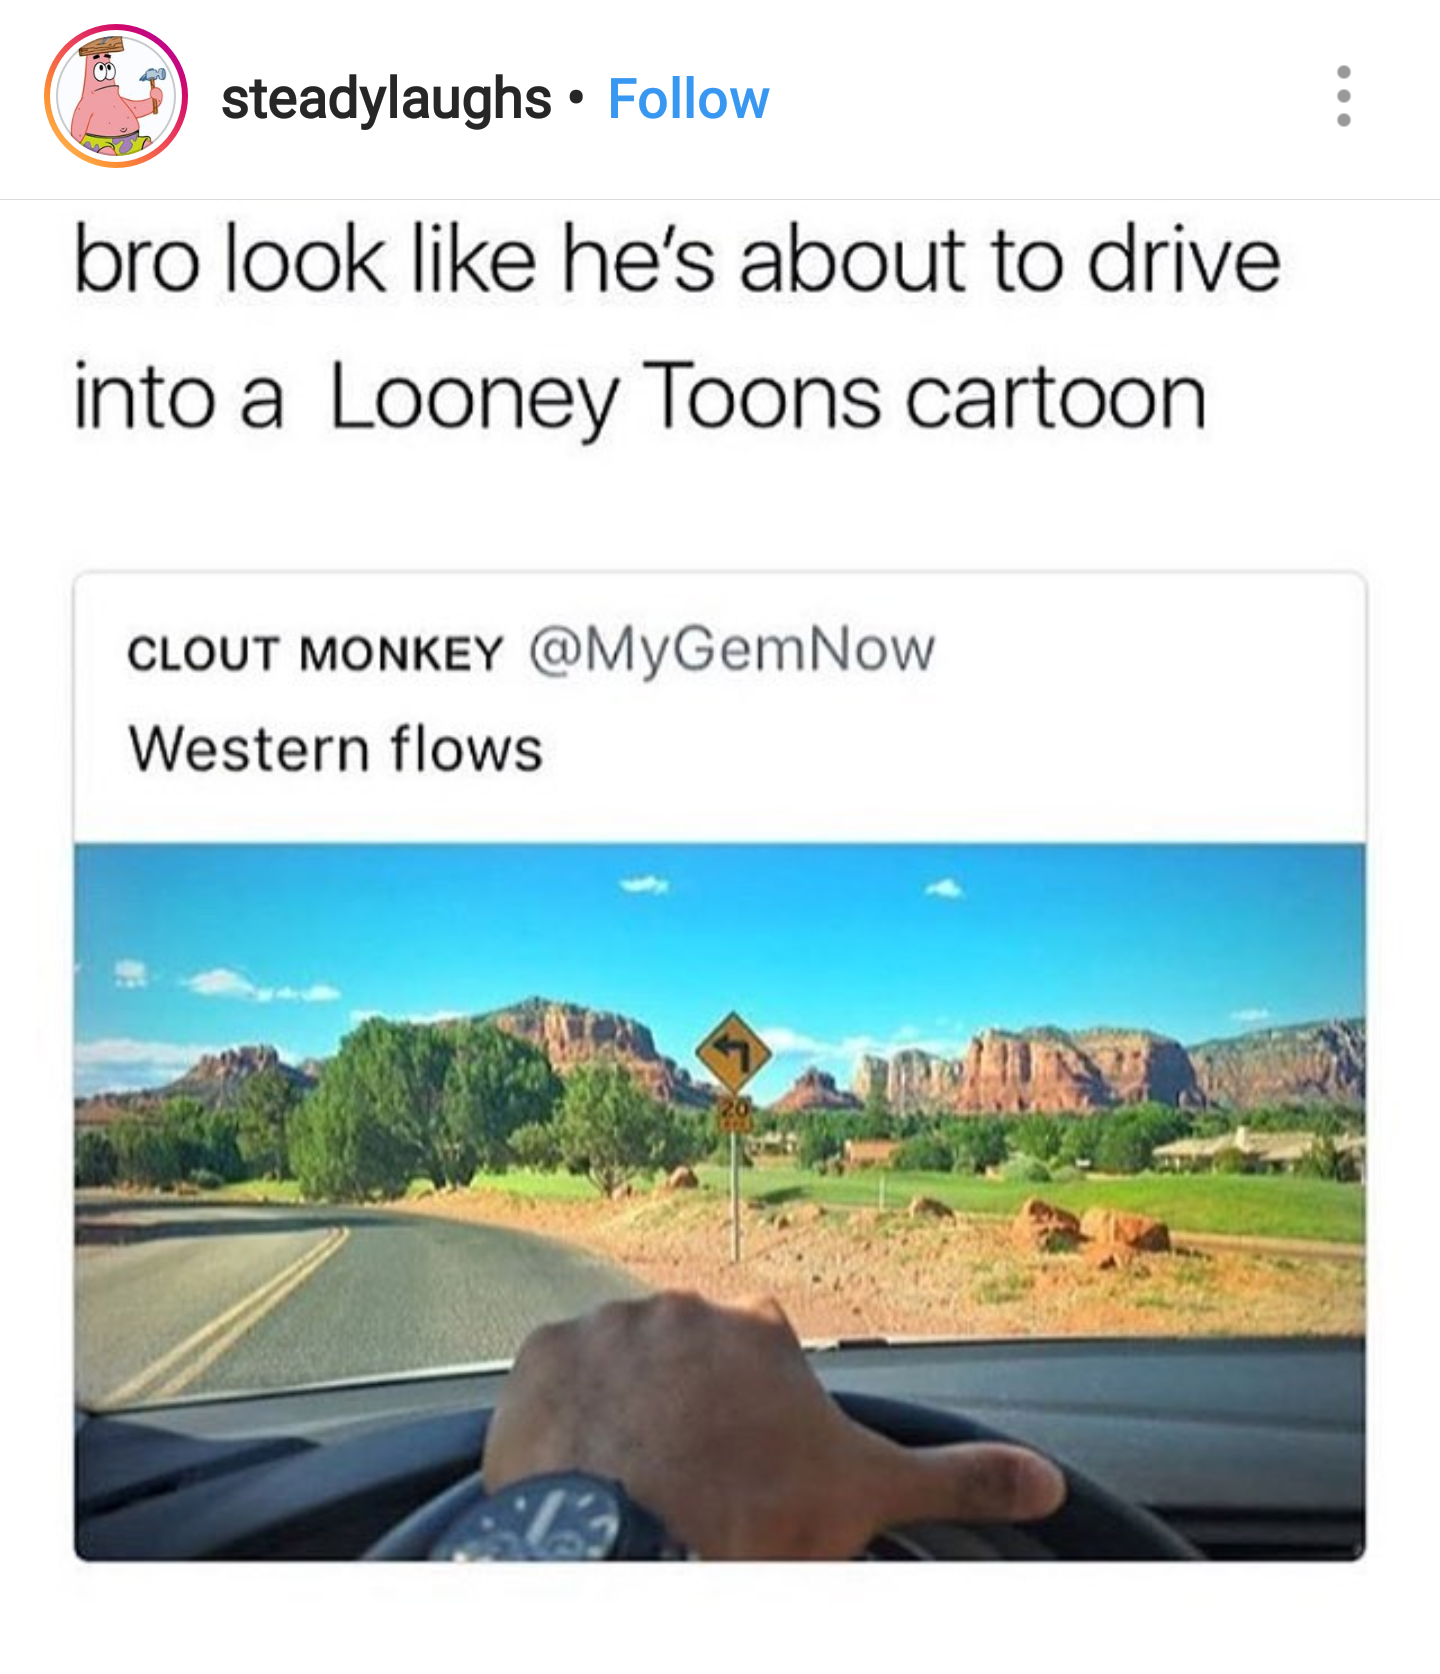 kik meme background - steadylaughs. bro look he's about to drive into a Looney Toons cartoon Clout Monkey Western flows